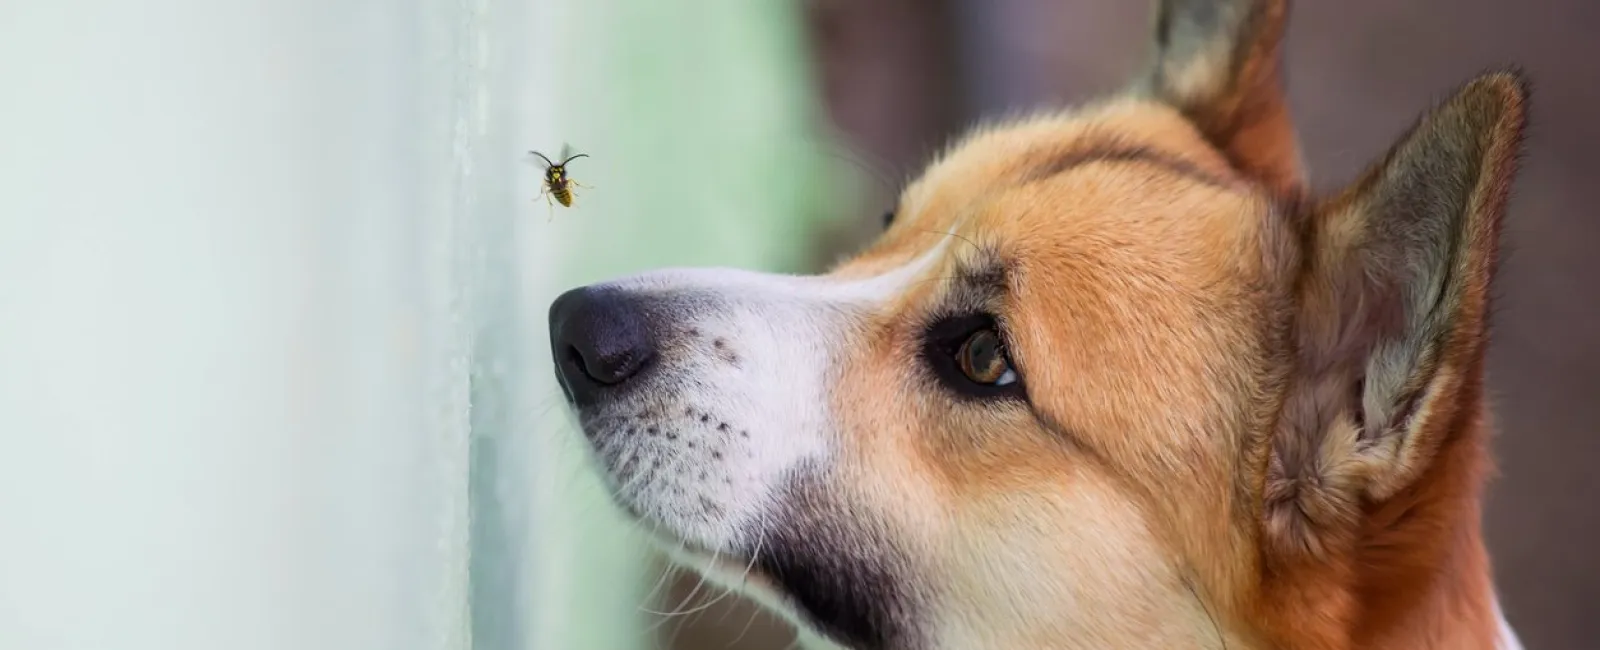 a bee flying over a dog